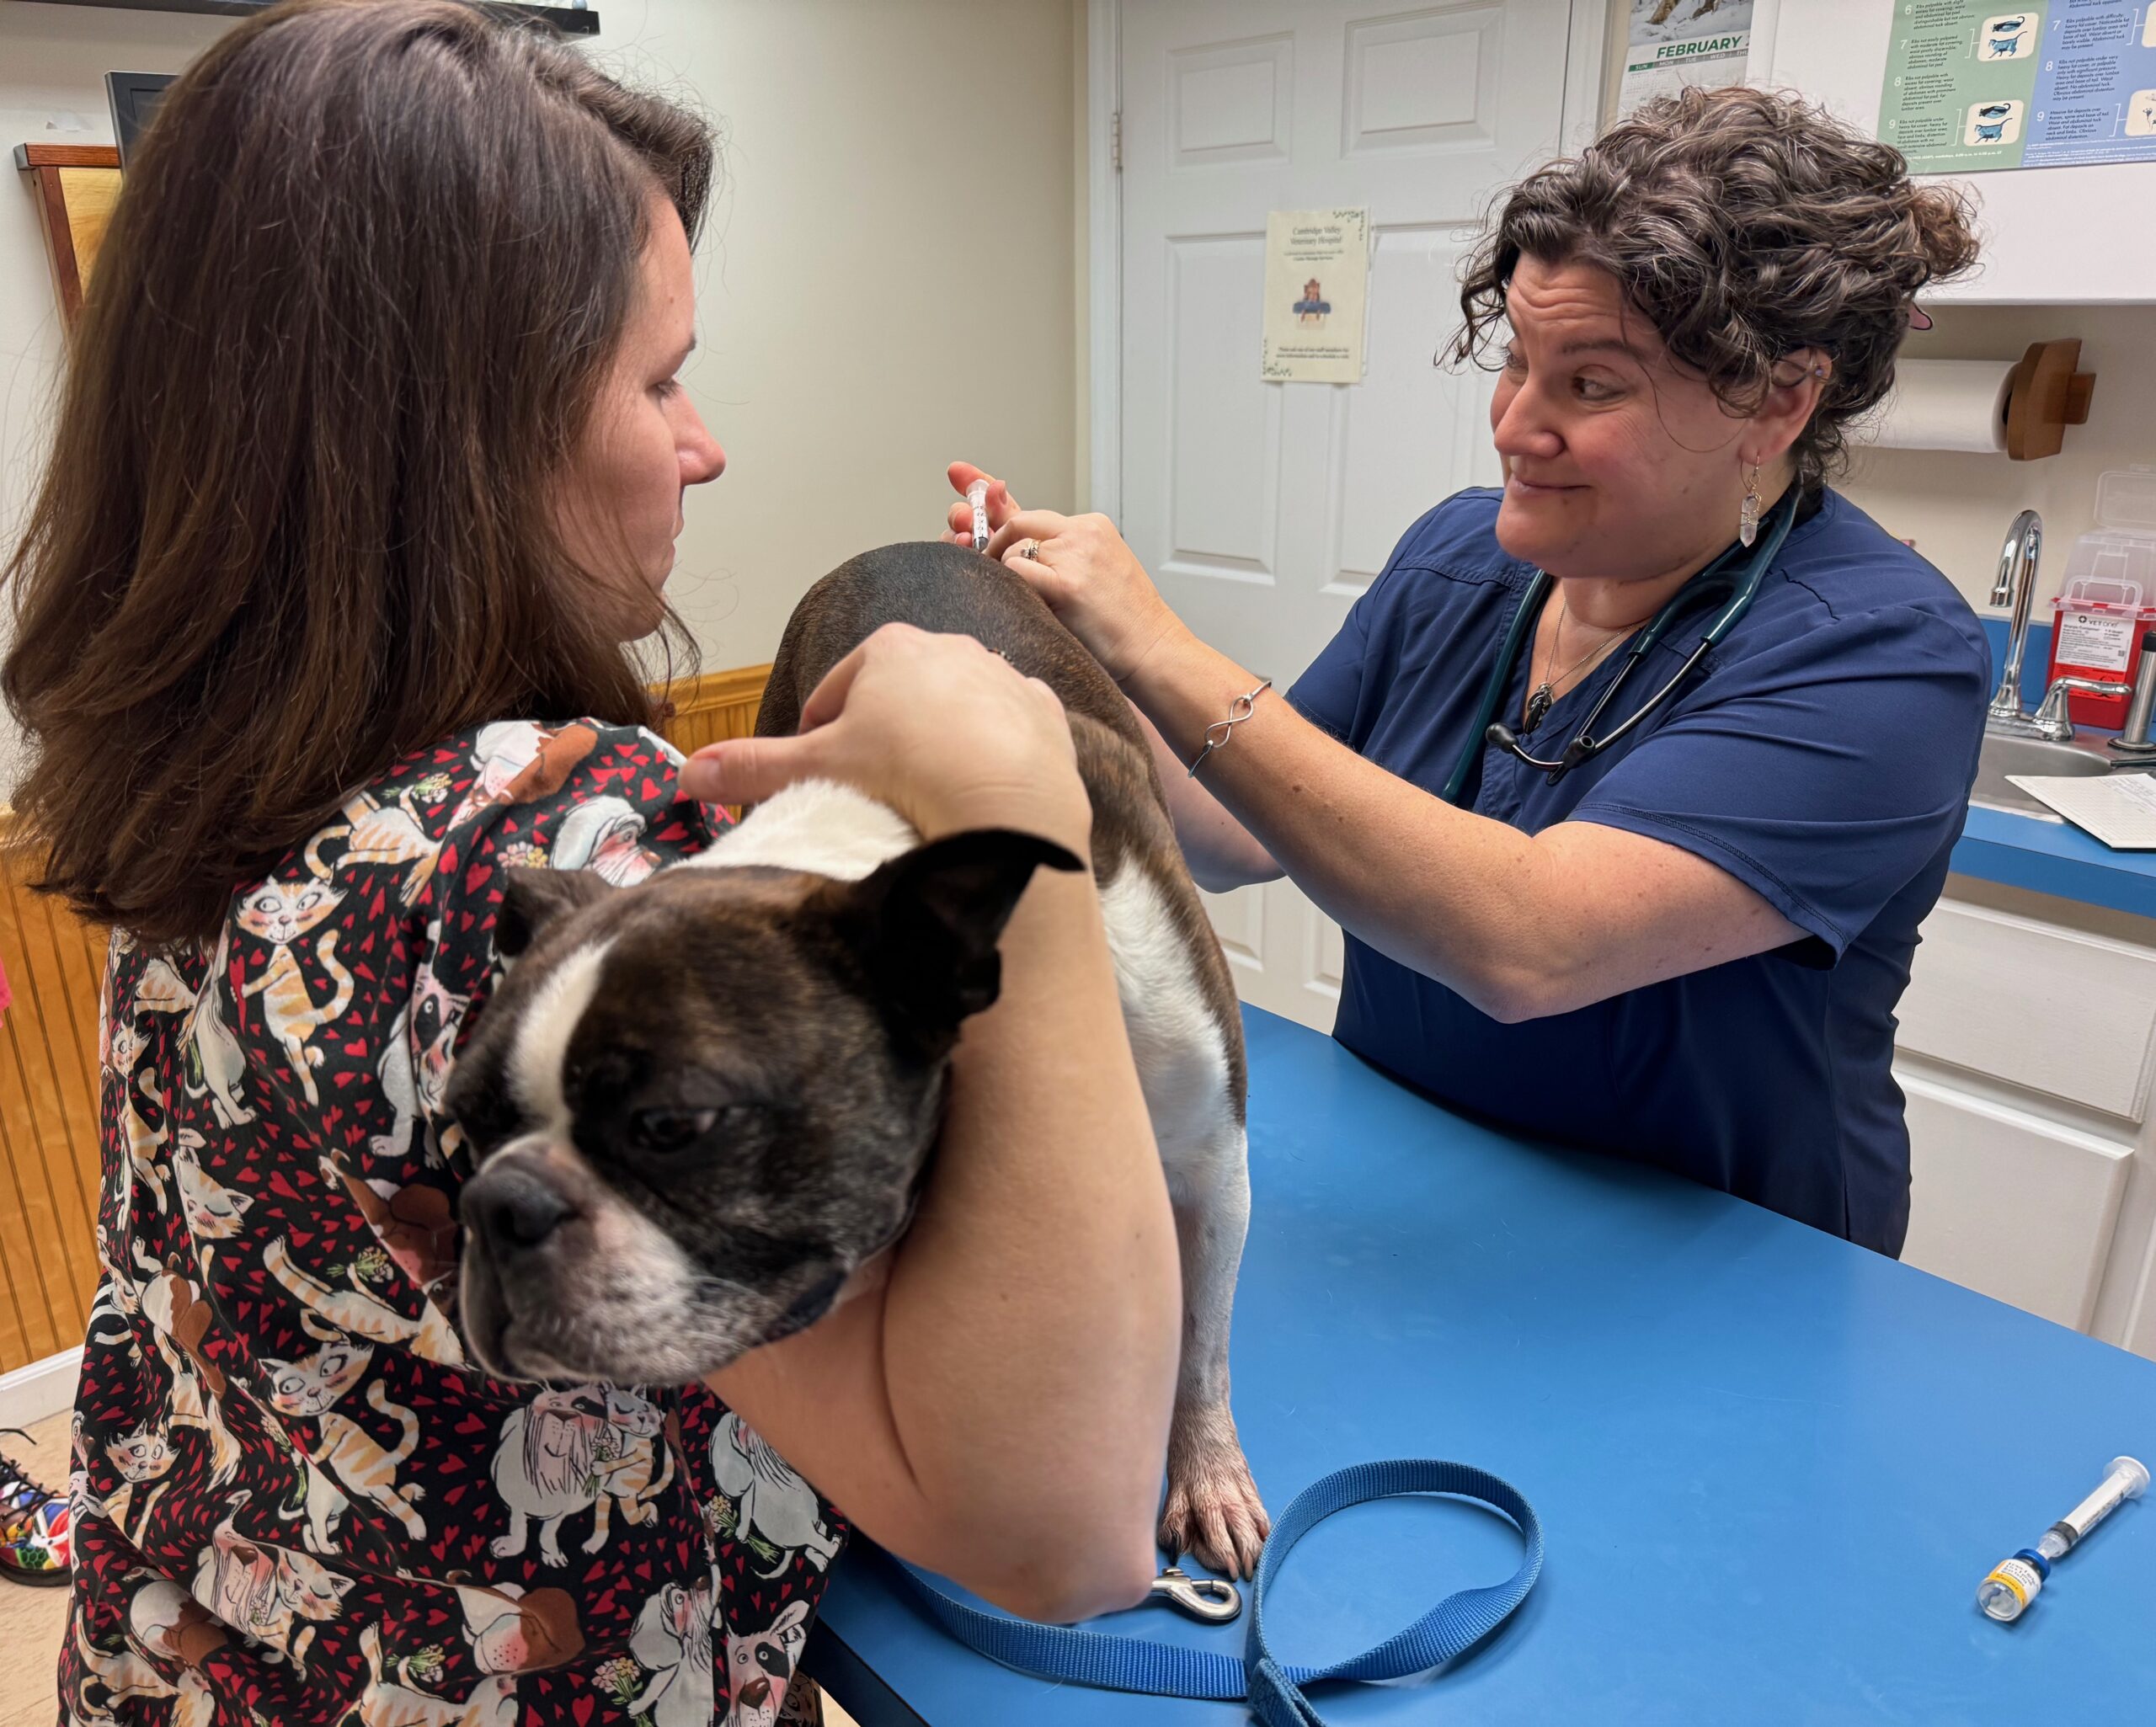 Bud’s Thriving Checkup: A Journey of Health and Happiness